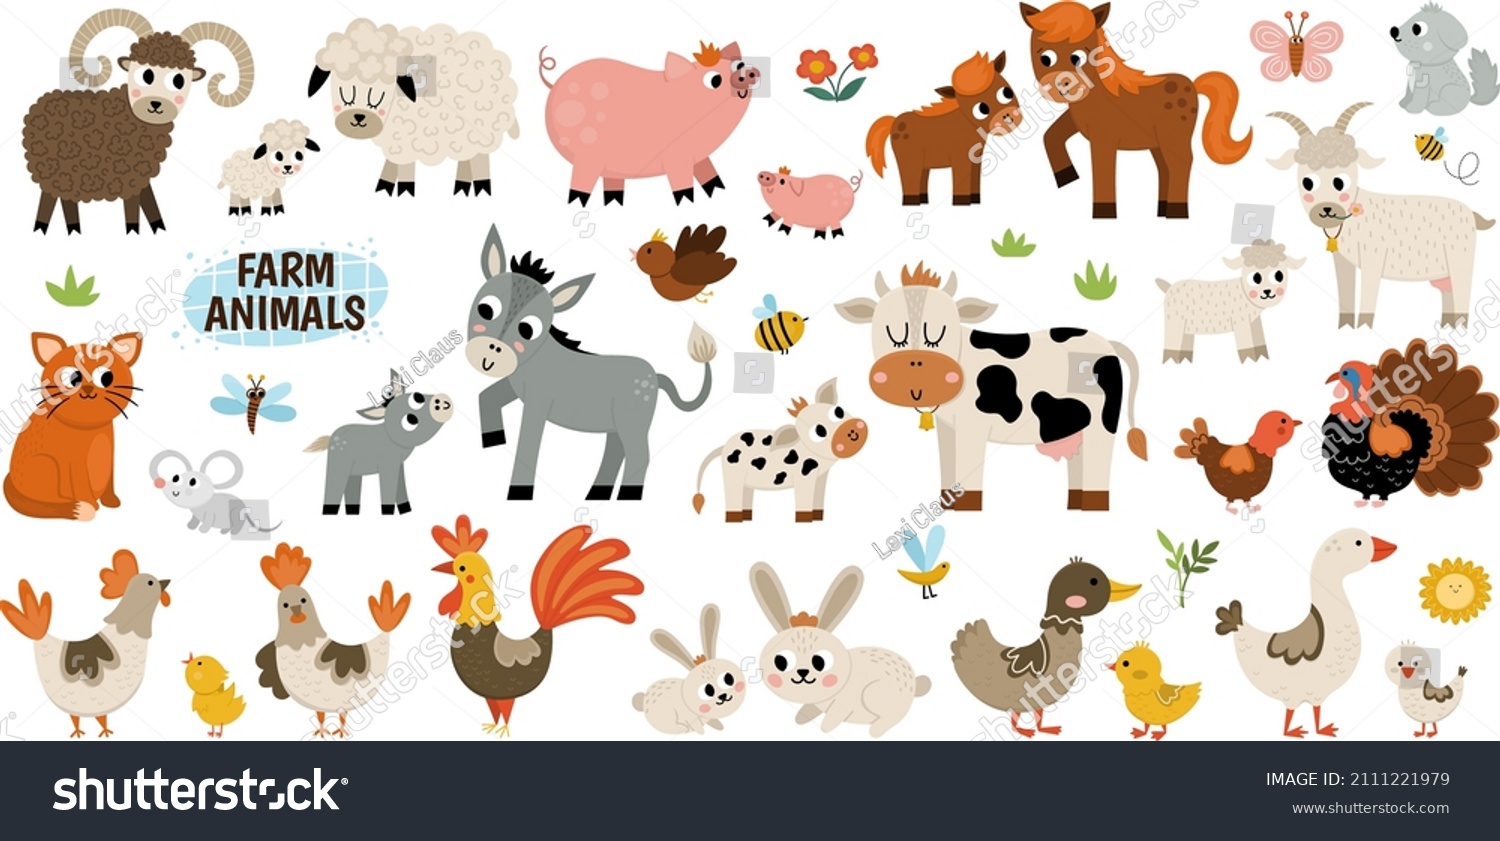 SVG of Big vector farm animals set. Big collection with cow, horse, goat, sheep, duck, hen, pig and their babies. Country birds illustration pack. Cute mother and baby icons. Rural themed nature collection
 svg